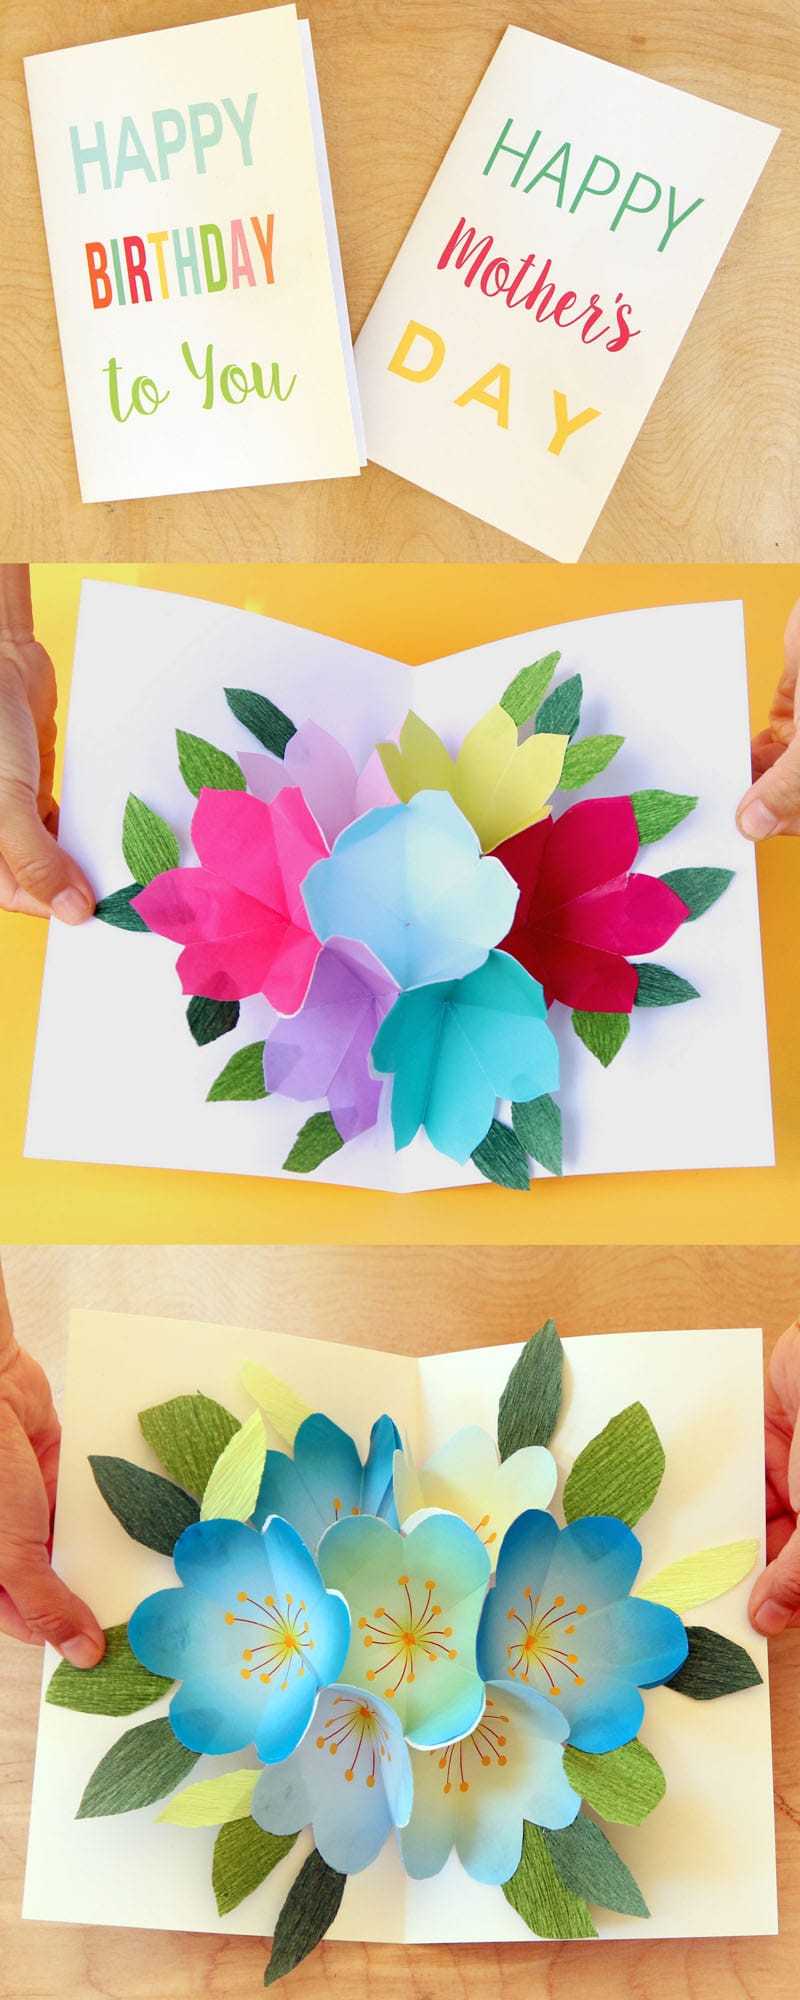 Free Printable Happy Birthday Card With Pop Up Bouquet – A Inside Happy Birthday Pop Up Card Free Template